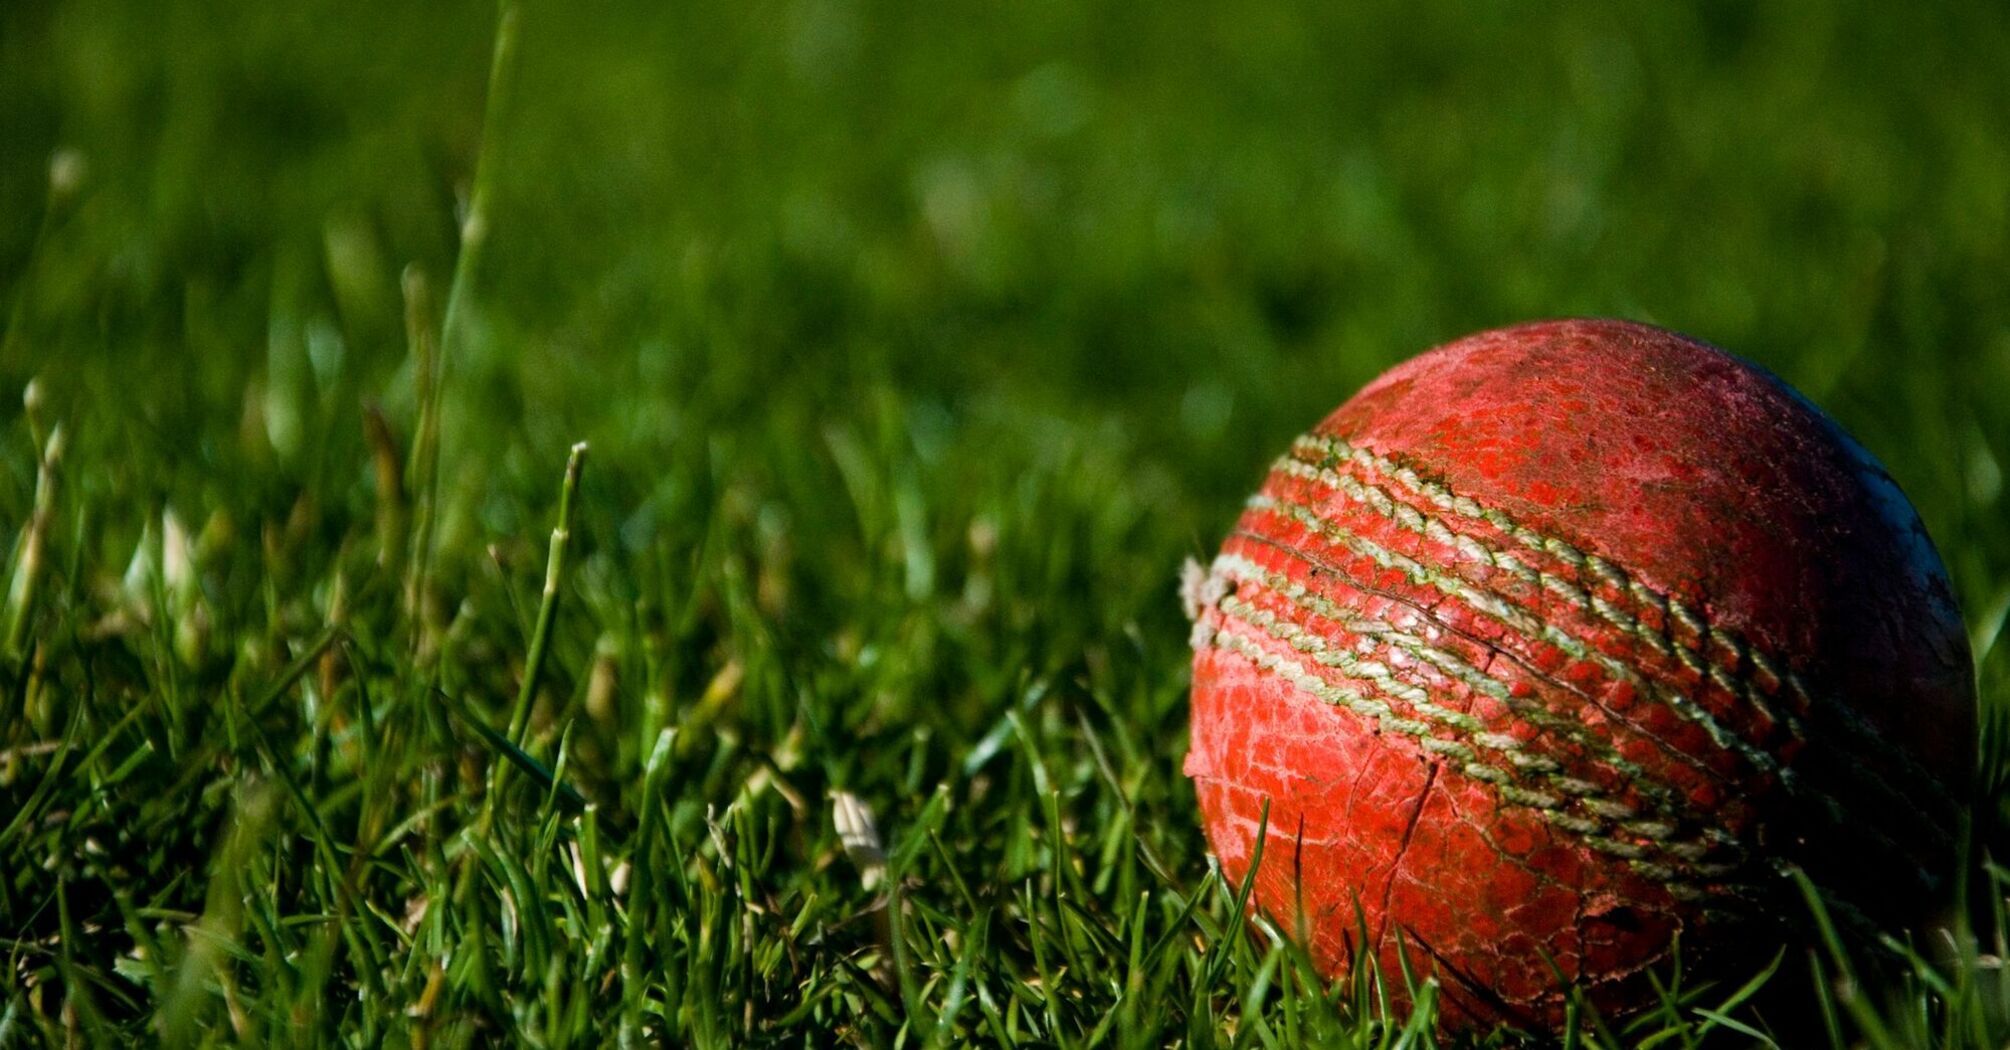 Red cricket ball on the grass